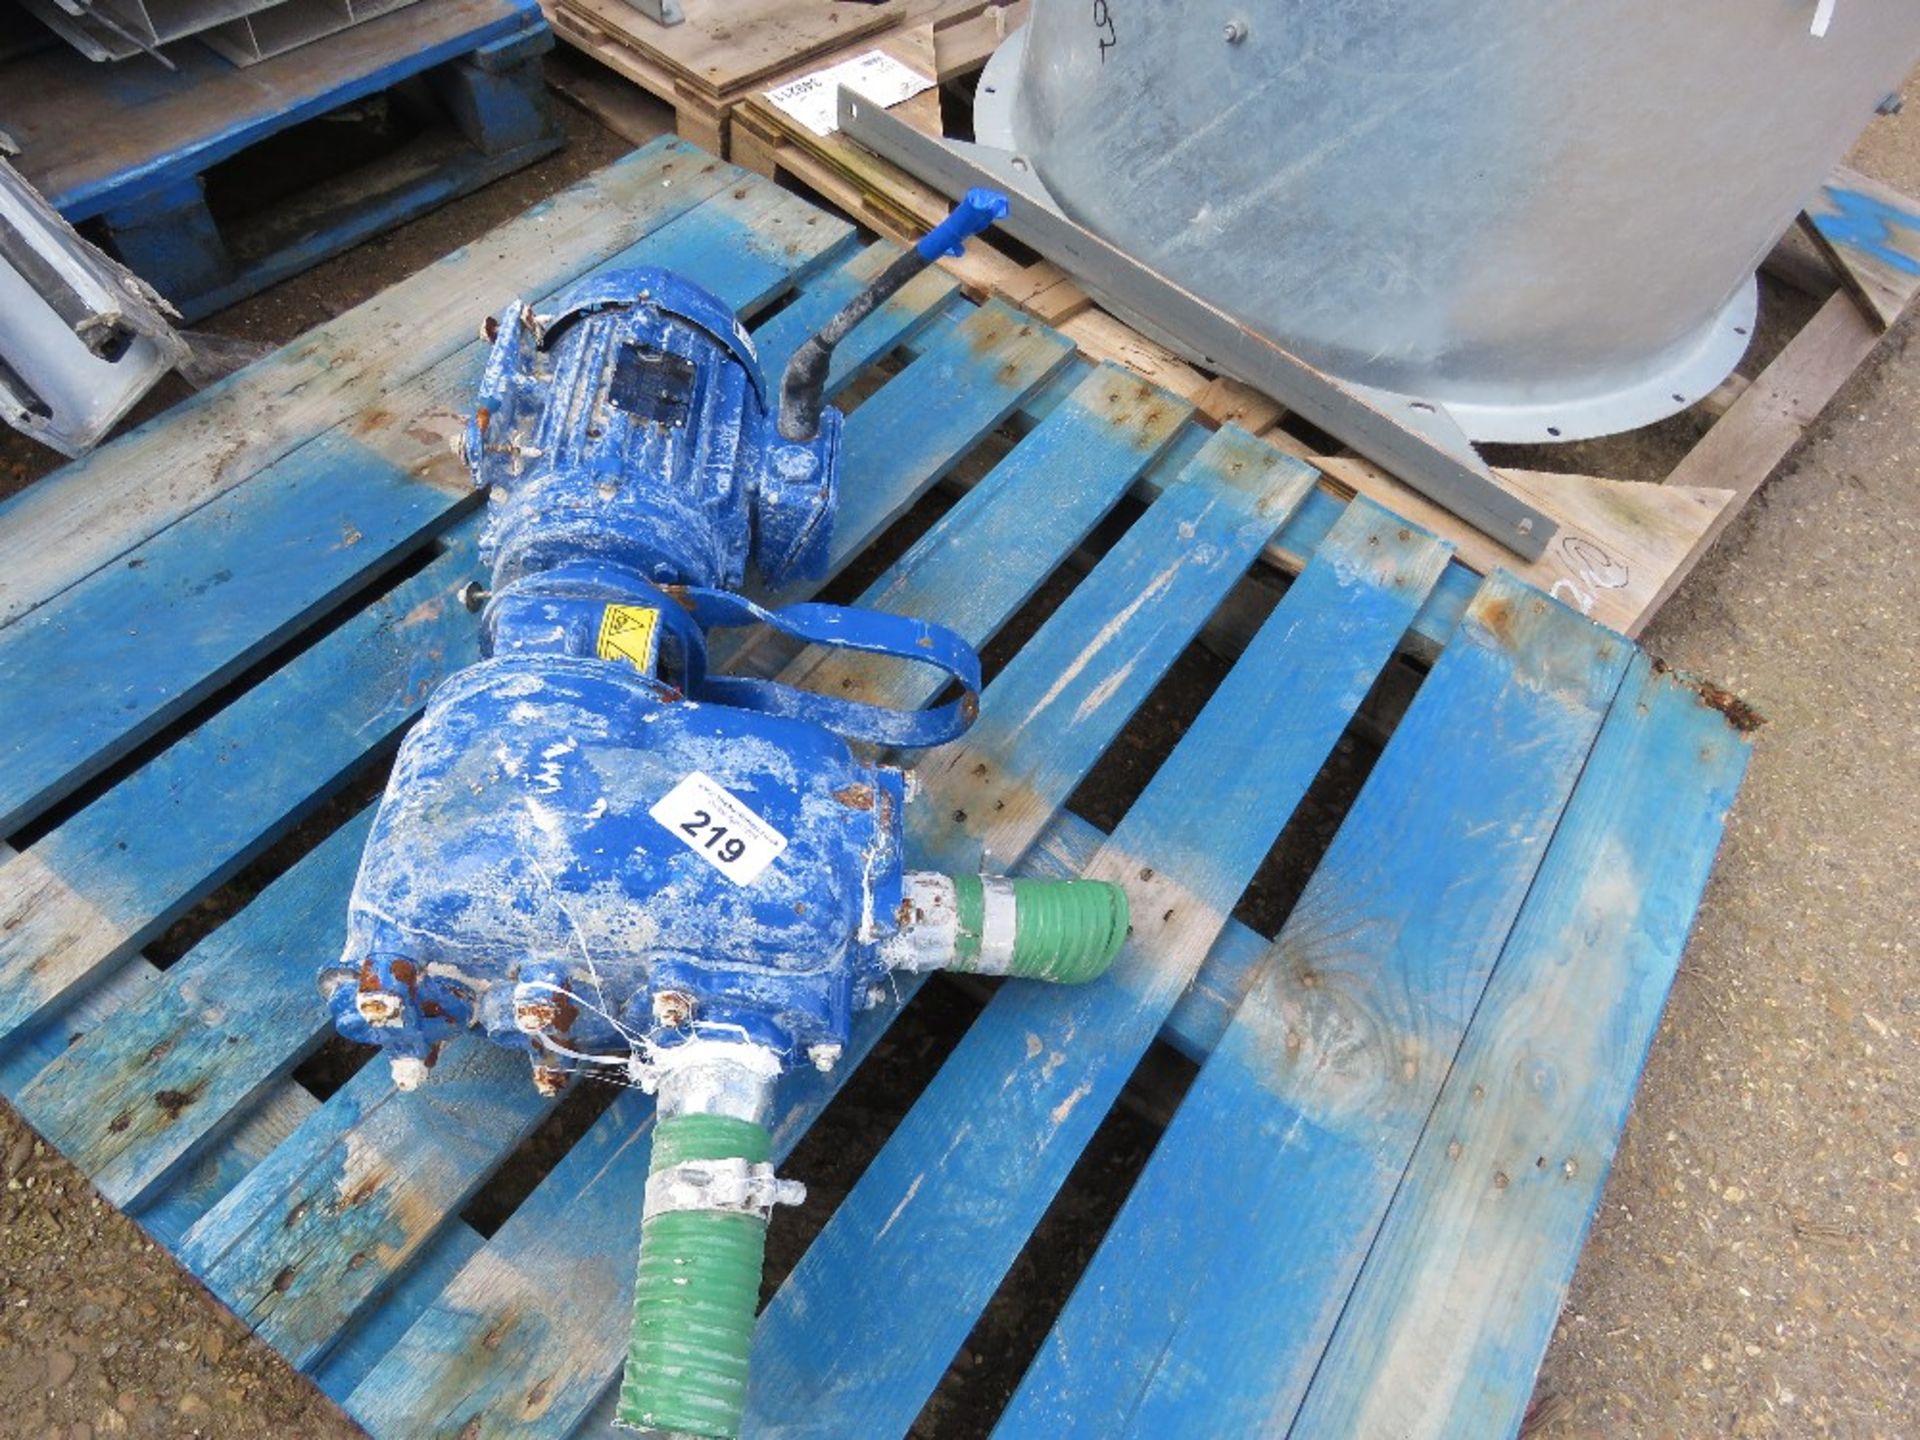 HIGH VOLUME WATER PUMP. WORKING WHEN REMOVED. DONE 4 MONTHS WORK ONLY. SOURCED FROM COMPANY LIQUIDA - Image 2 of 4